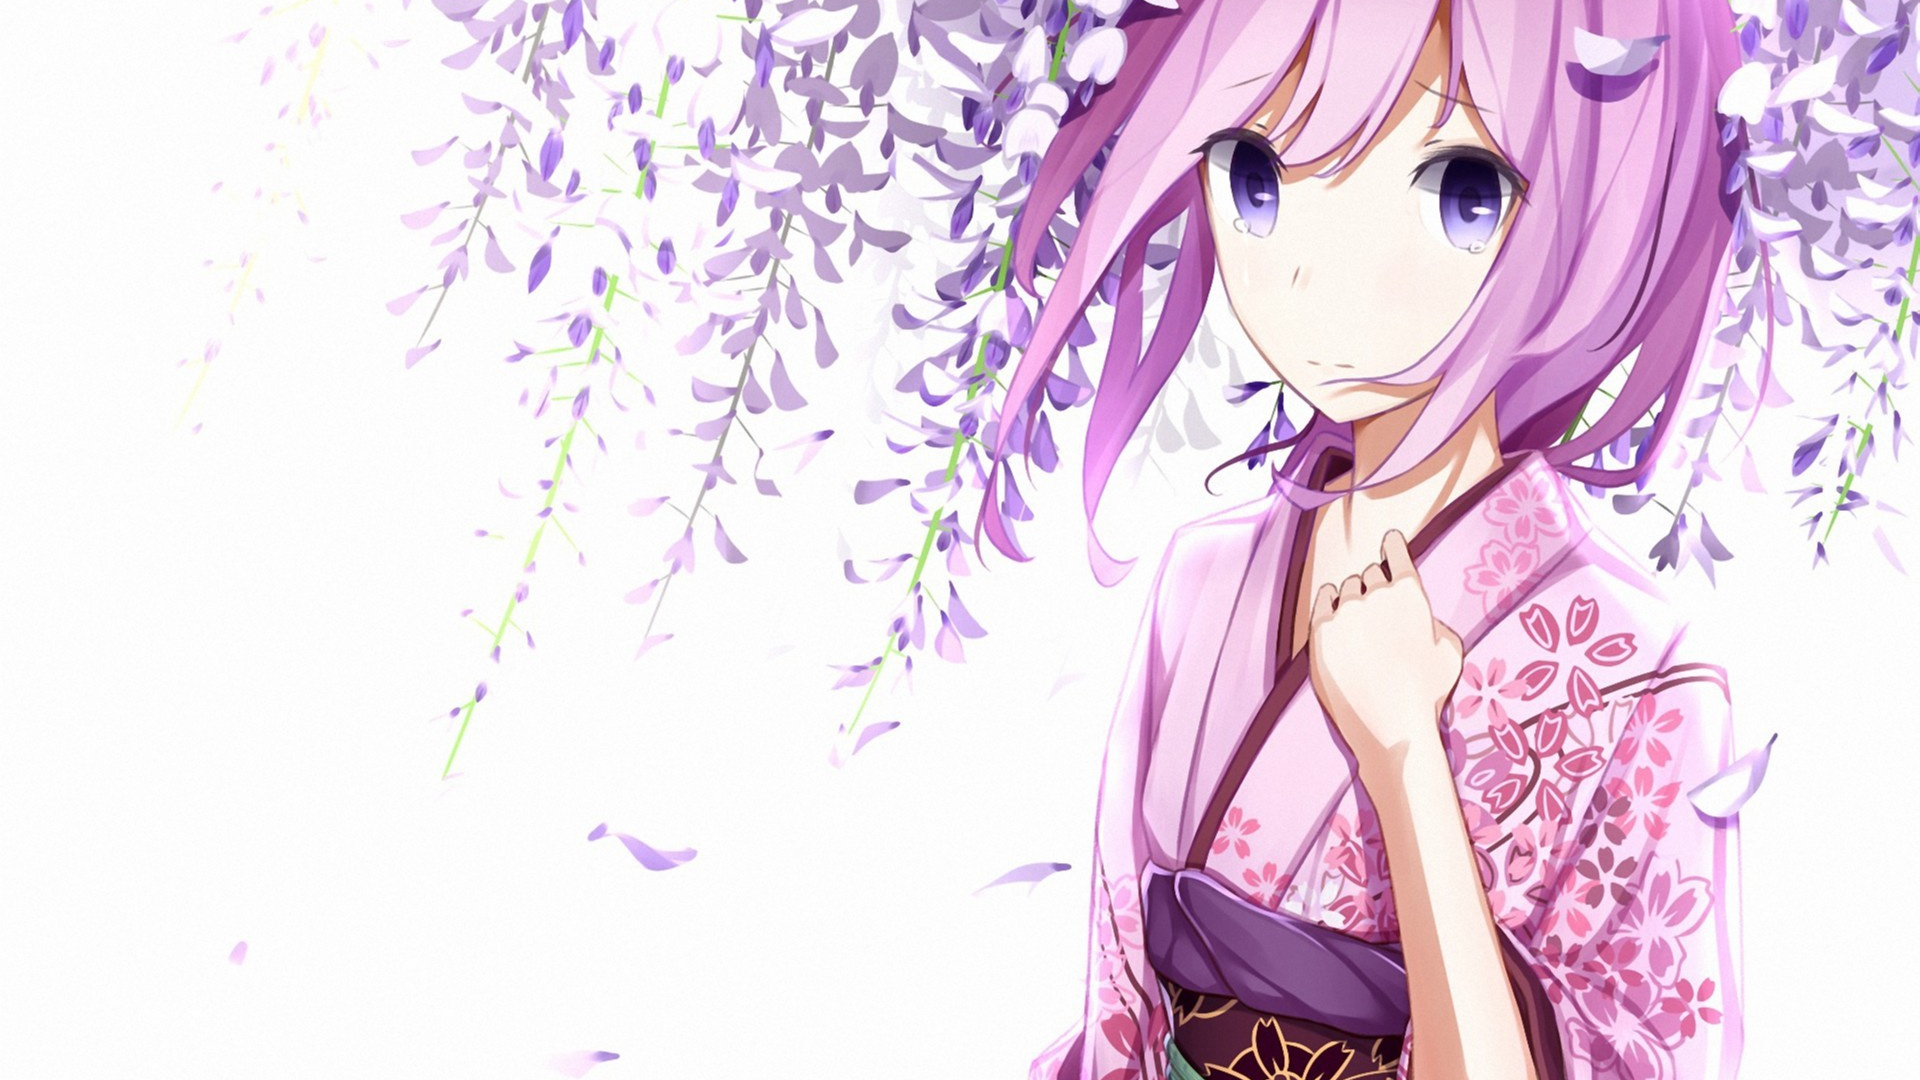 Personnage D'anime Fille Aux Cheveux Violets. Wallpaper in 1920x1080 Resolution